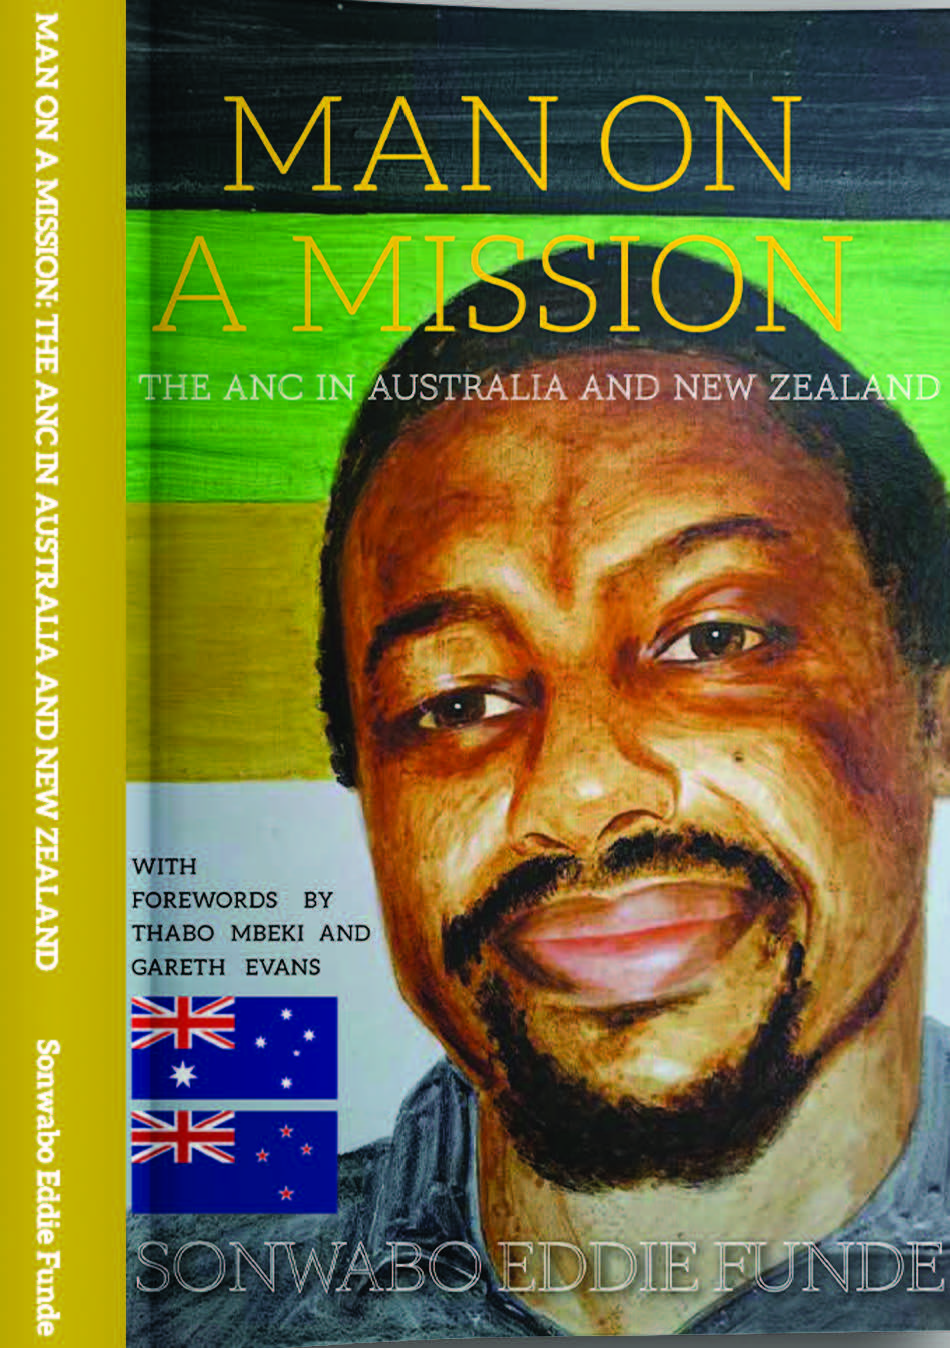 Man on A Mission (The ANC in Australia and New Zealand)